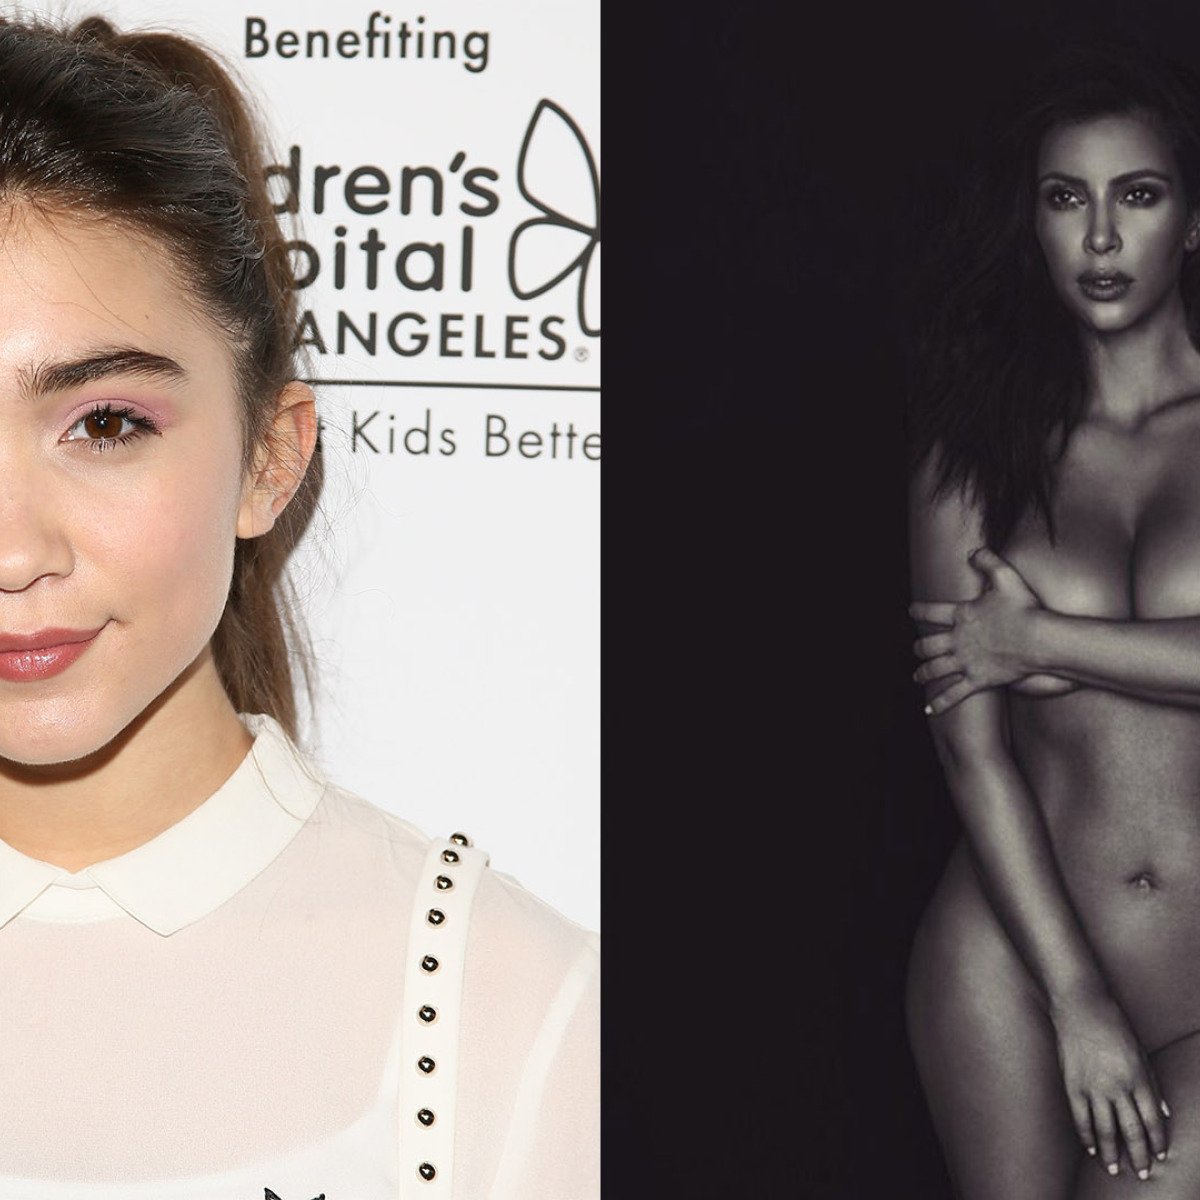 alexis donis recommends pictures of rowan blanchard naked pic